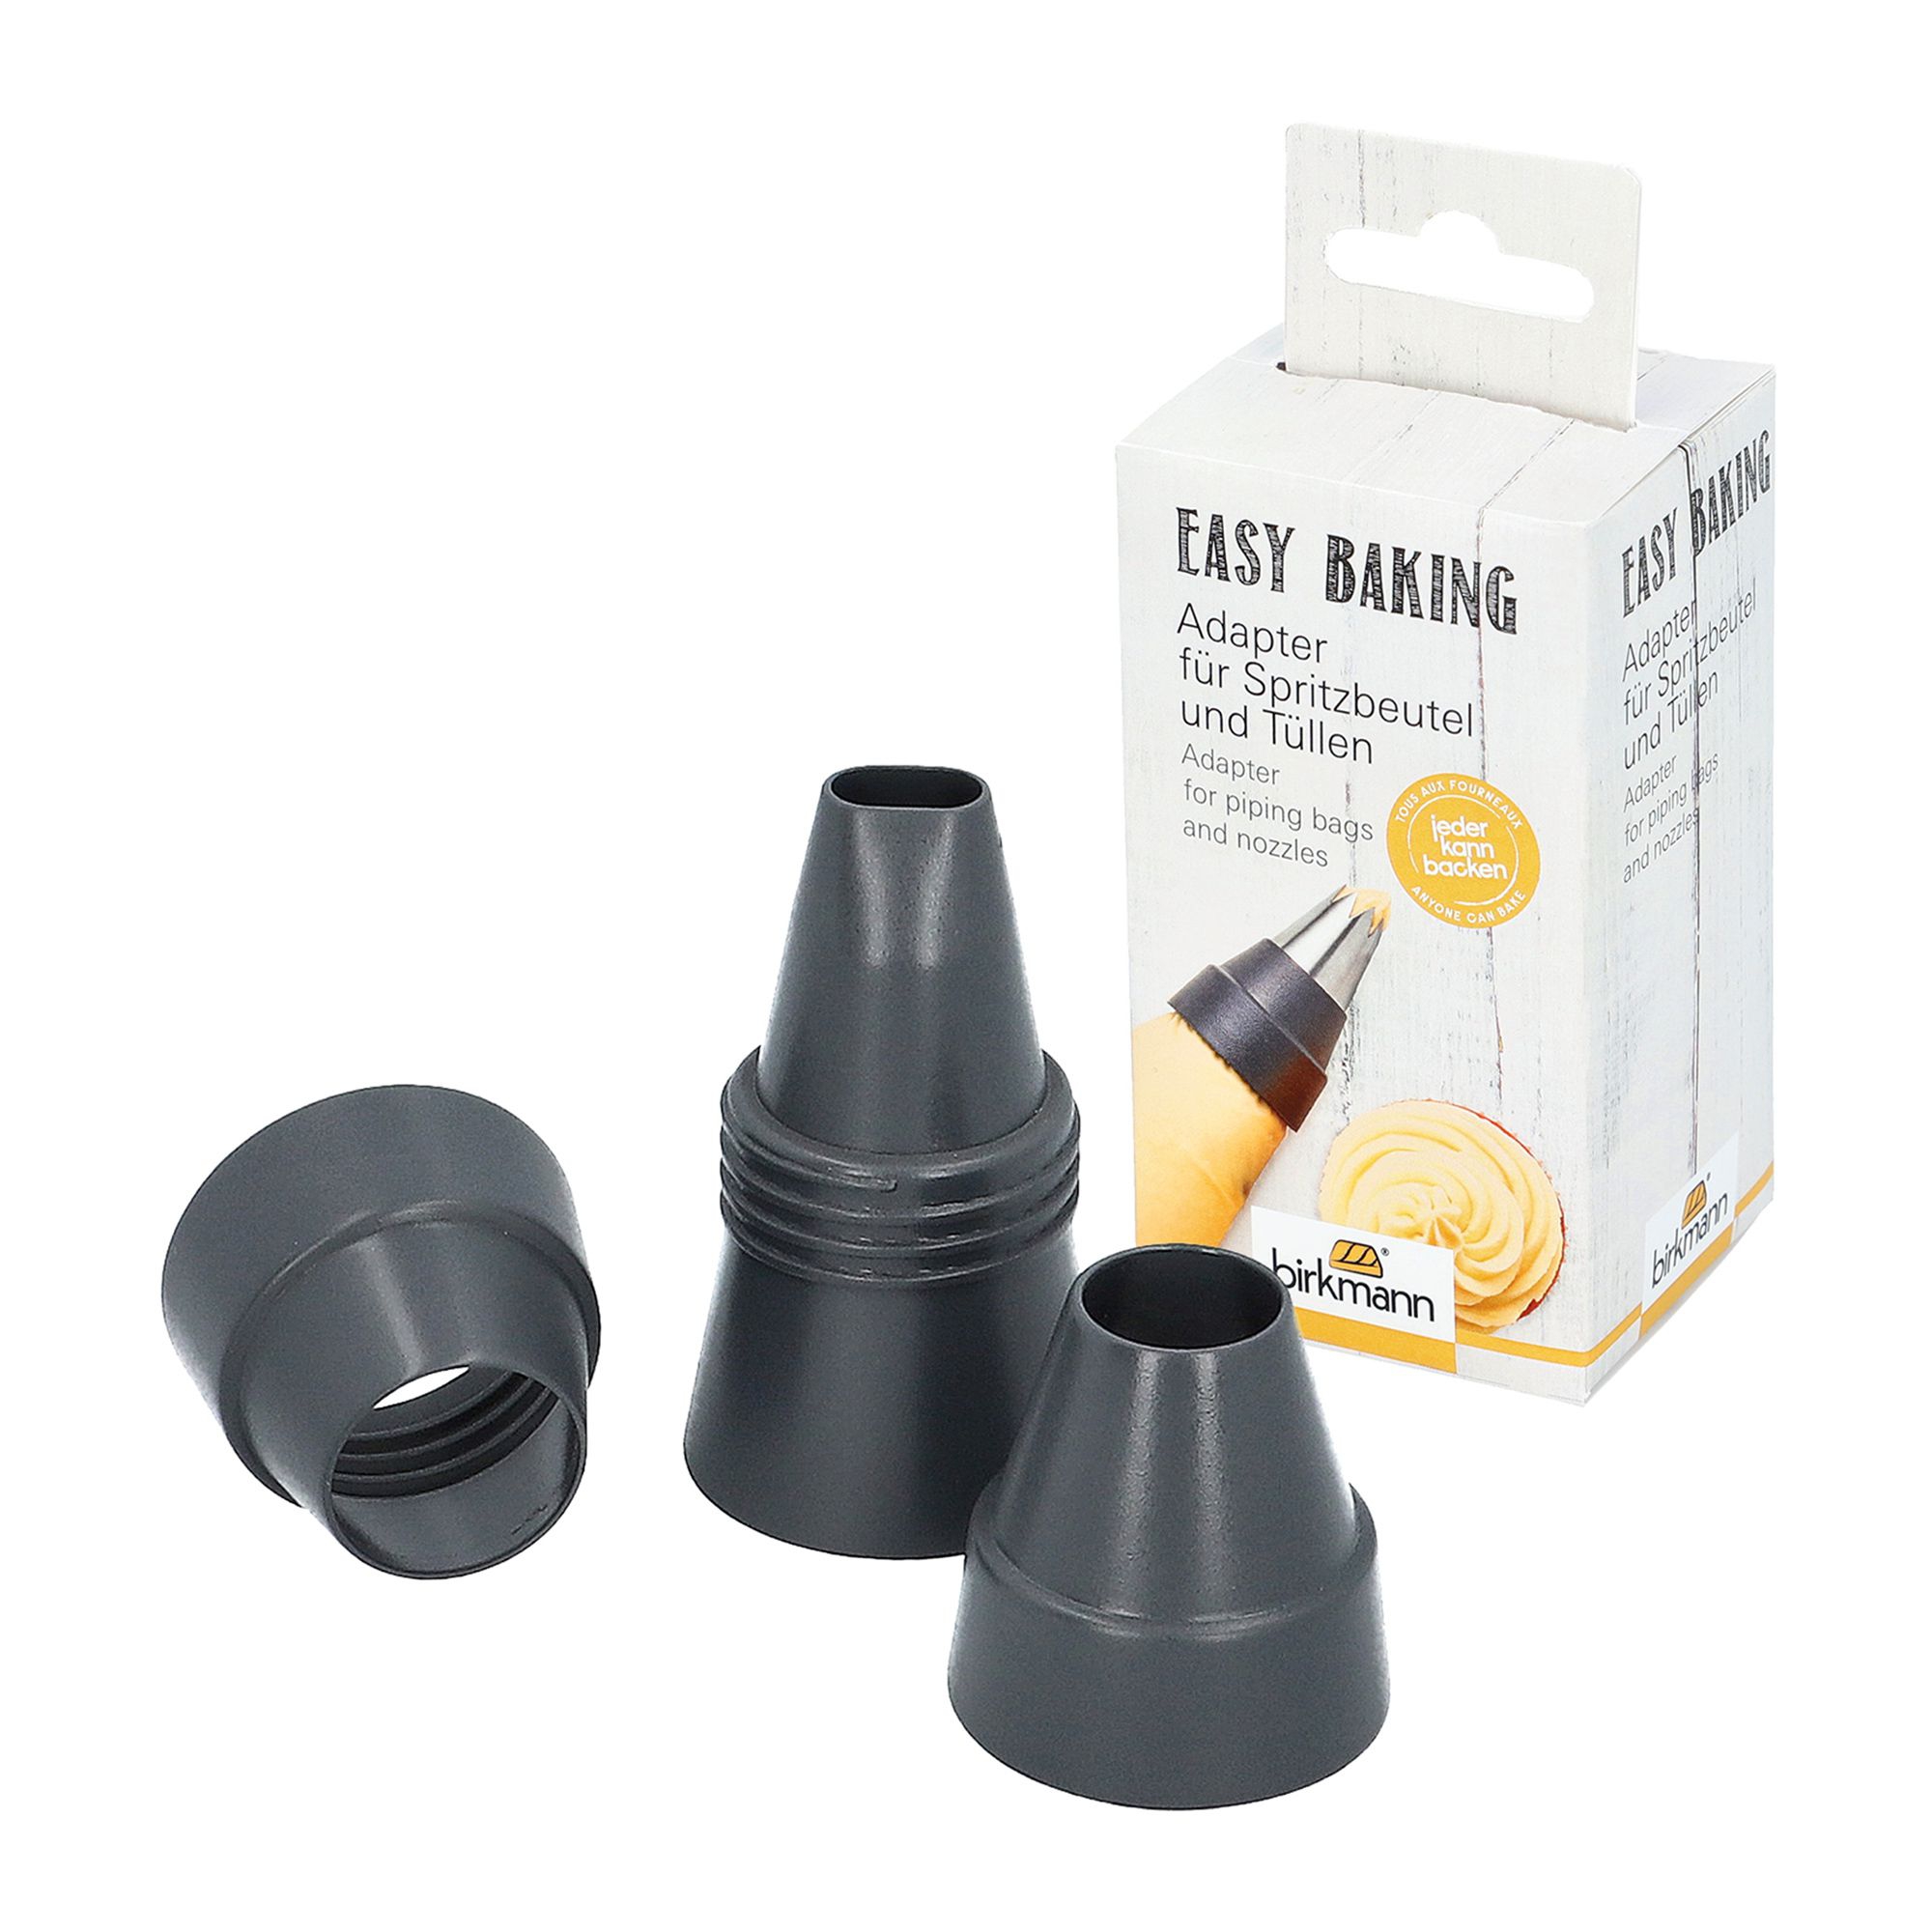 RBV Birkmann - Easy Baking - Adapter for piping bags and nozzles